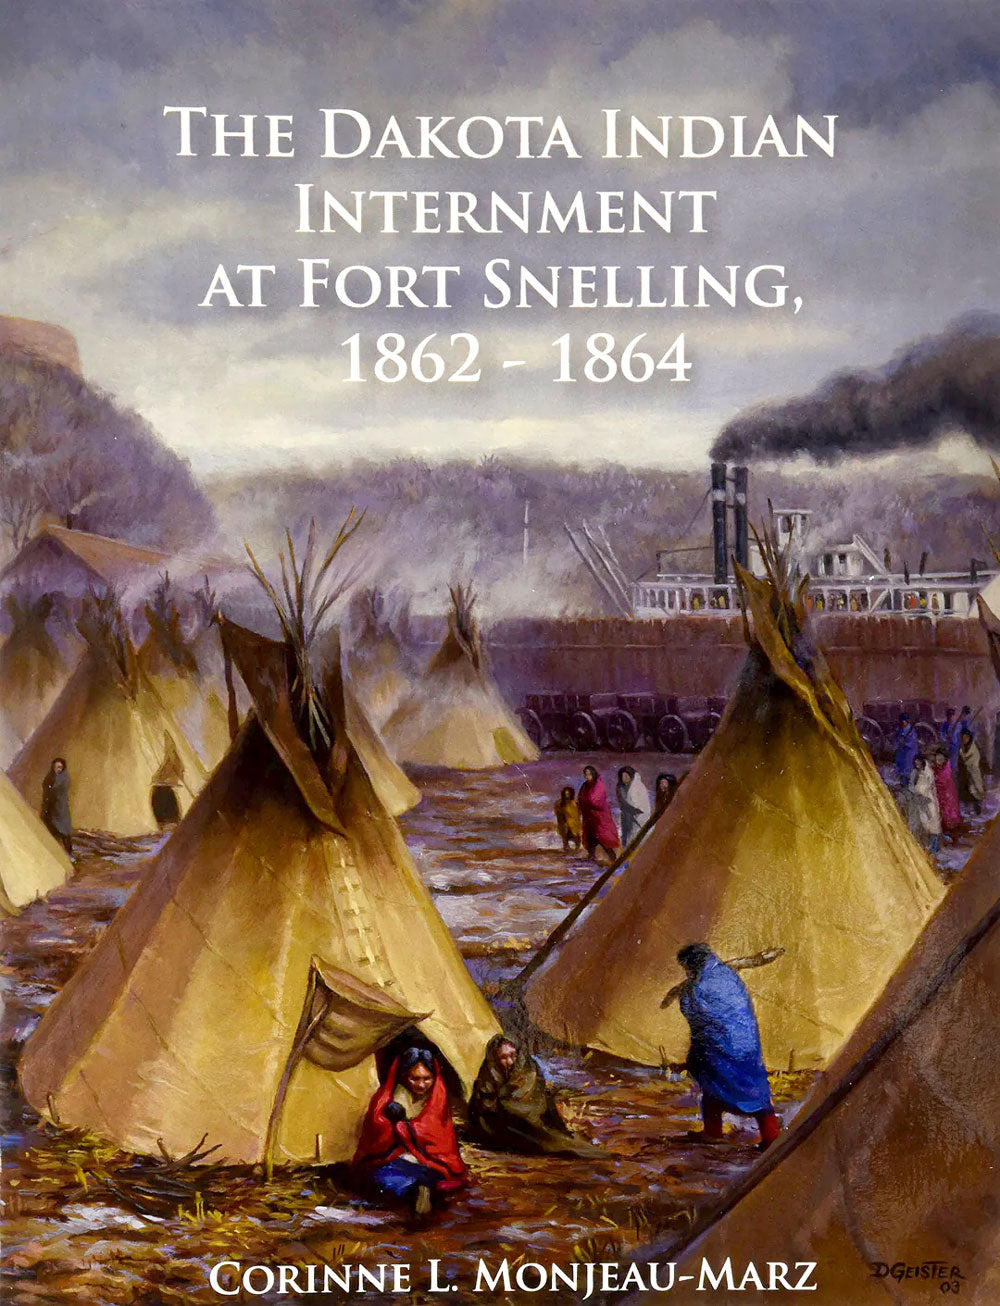 The Dakota Indian Internment At Fort Snelling, 1862-1864 by Corinne L. Monjeau-Marz 